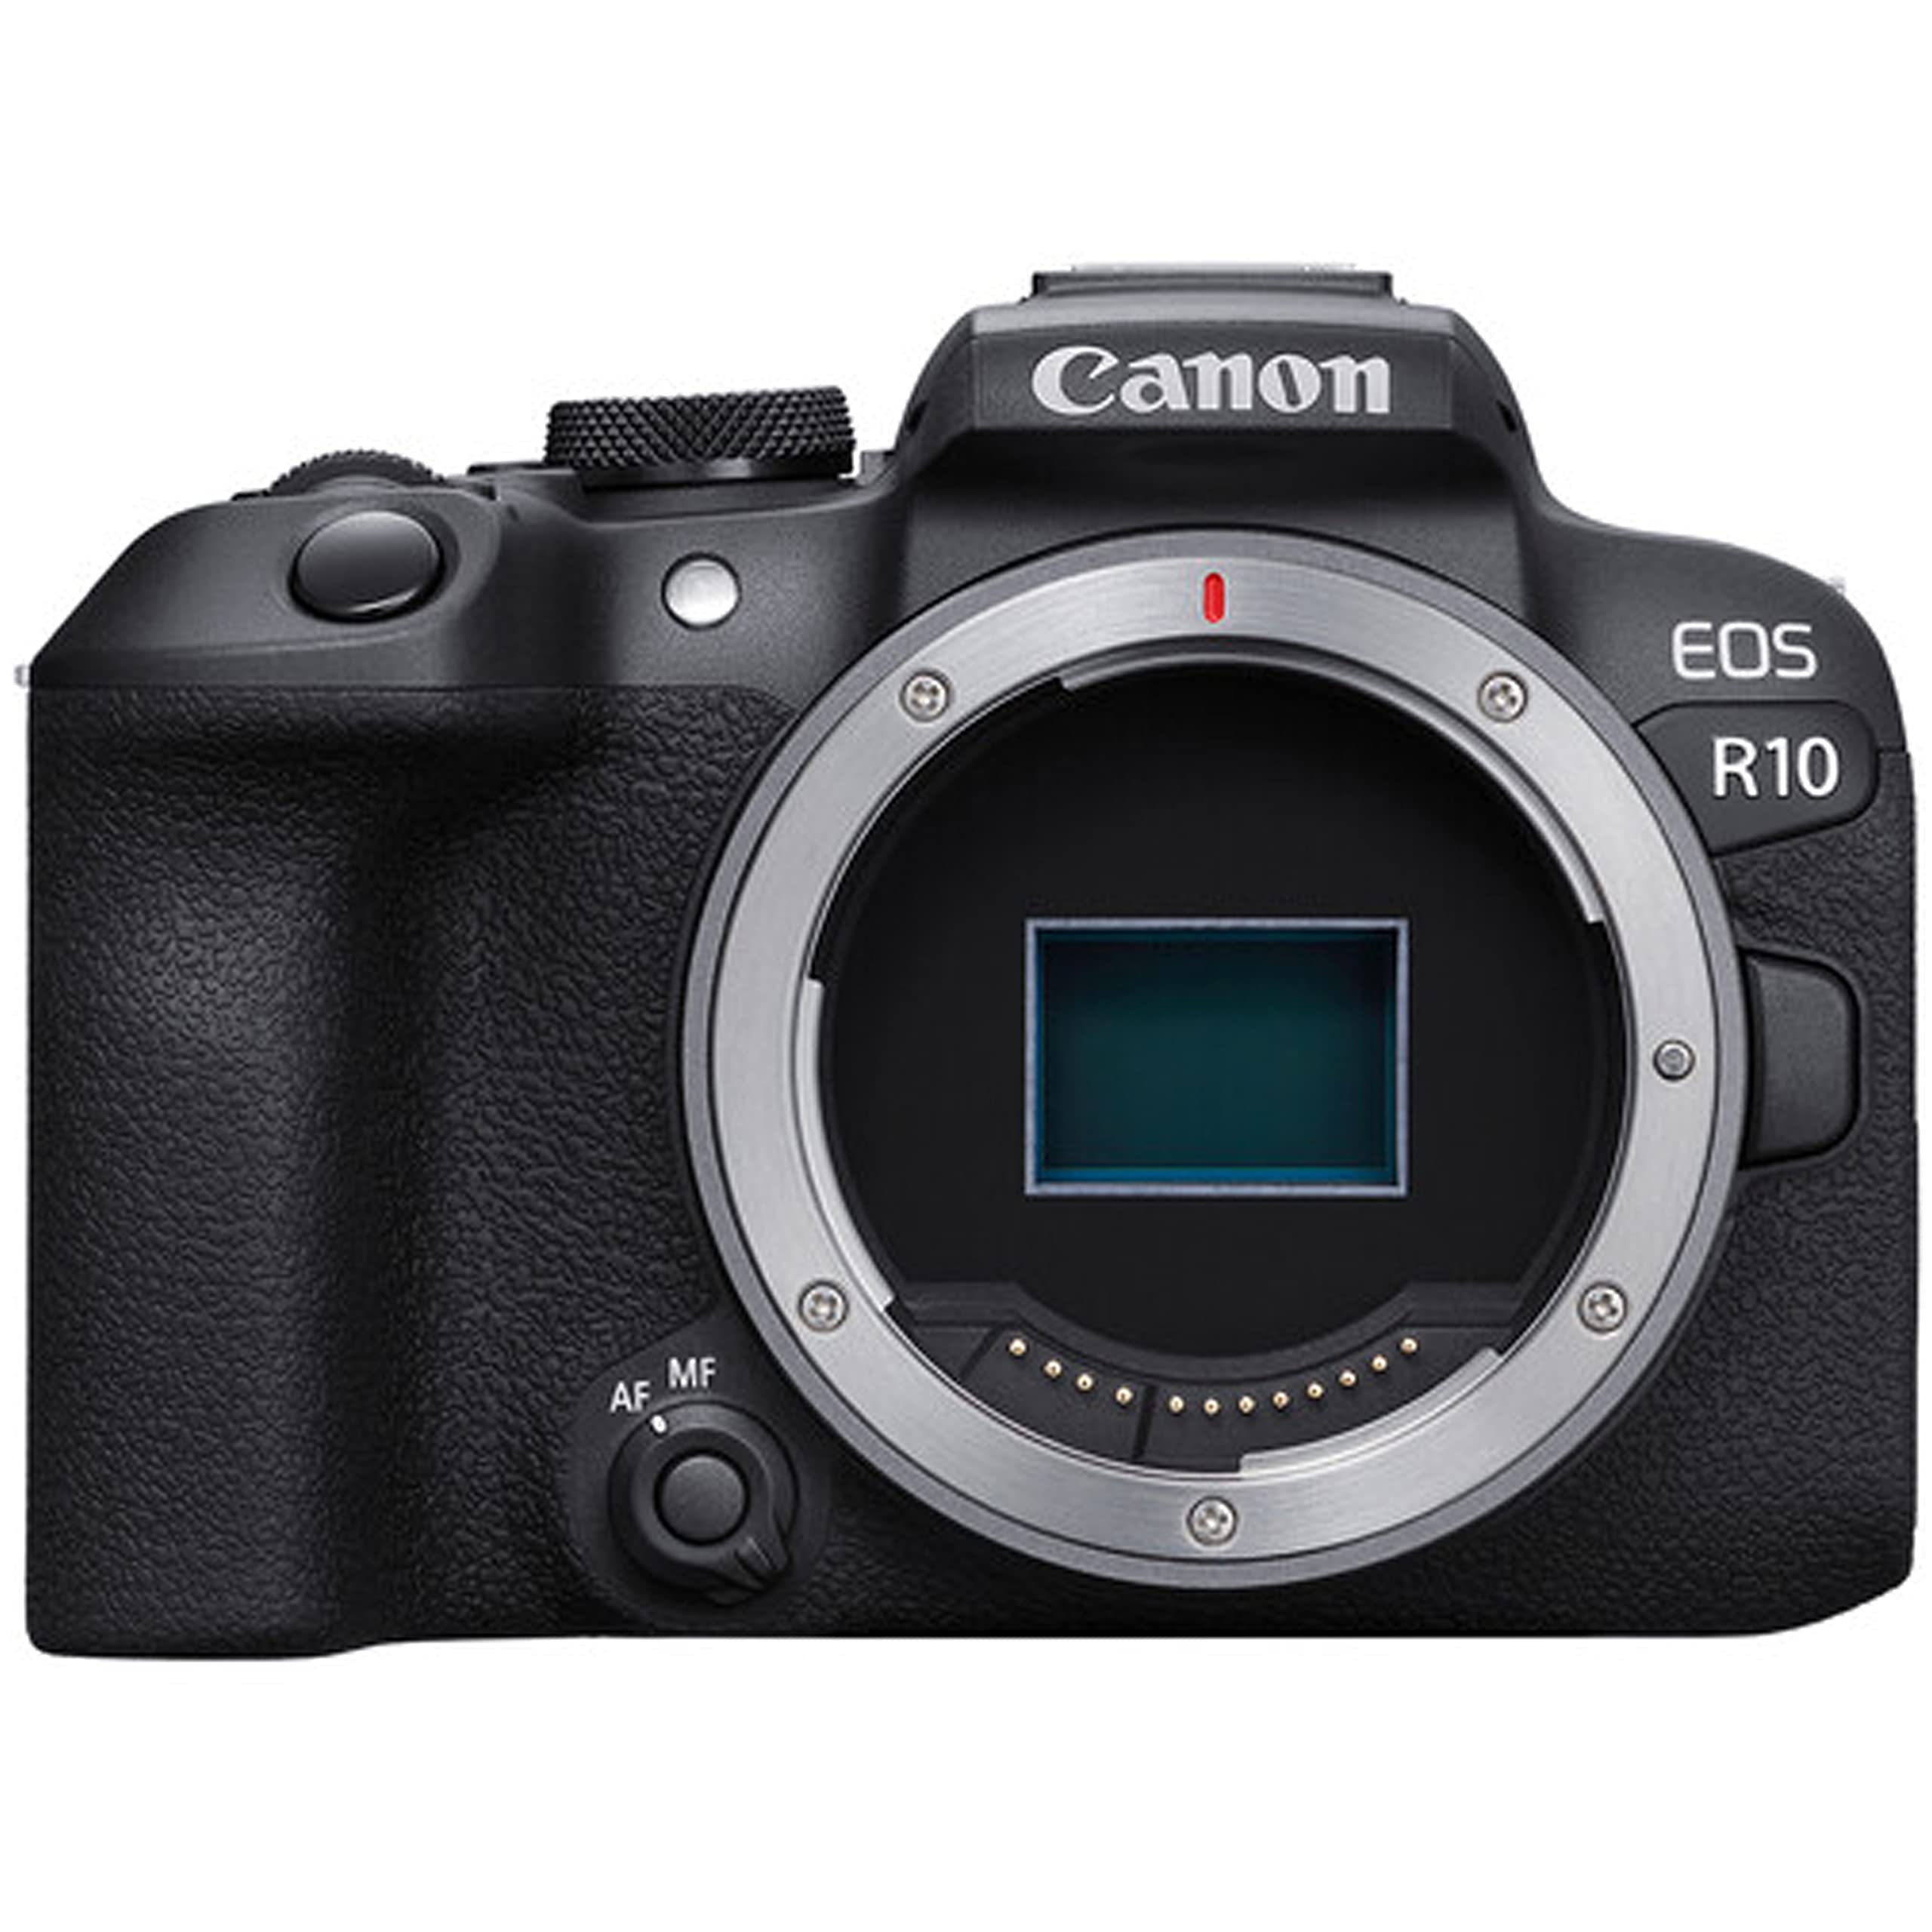 Canon EOS R10 Mirrorless Camera w/RF-S 18-45mm f/4.5-6.3 is STM + EF 75-300mm f/4-5.6 III Lens + 500mm f/8 Focus Lens + 2X 64GB Memory + Case + Microphone + LED Video Light + More (35pc Bundle)